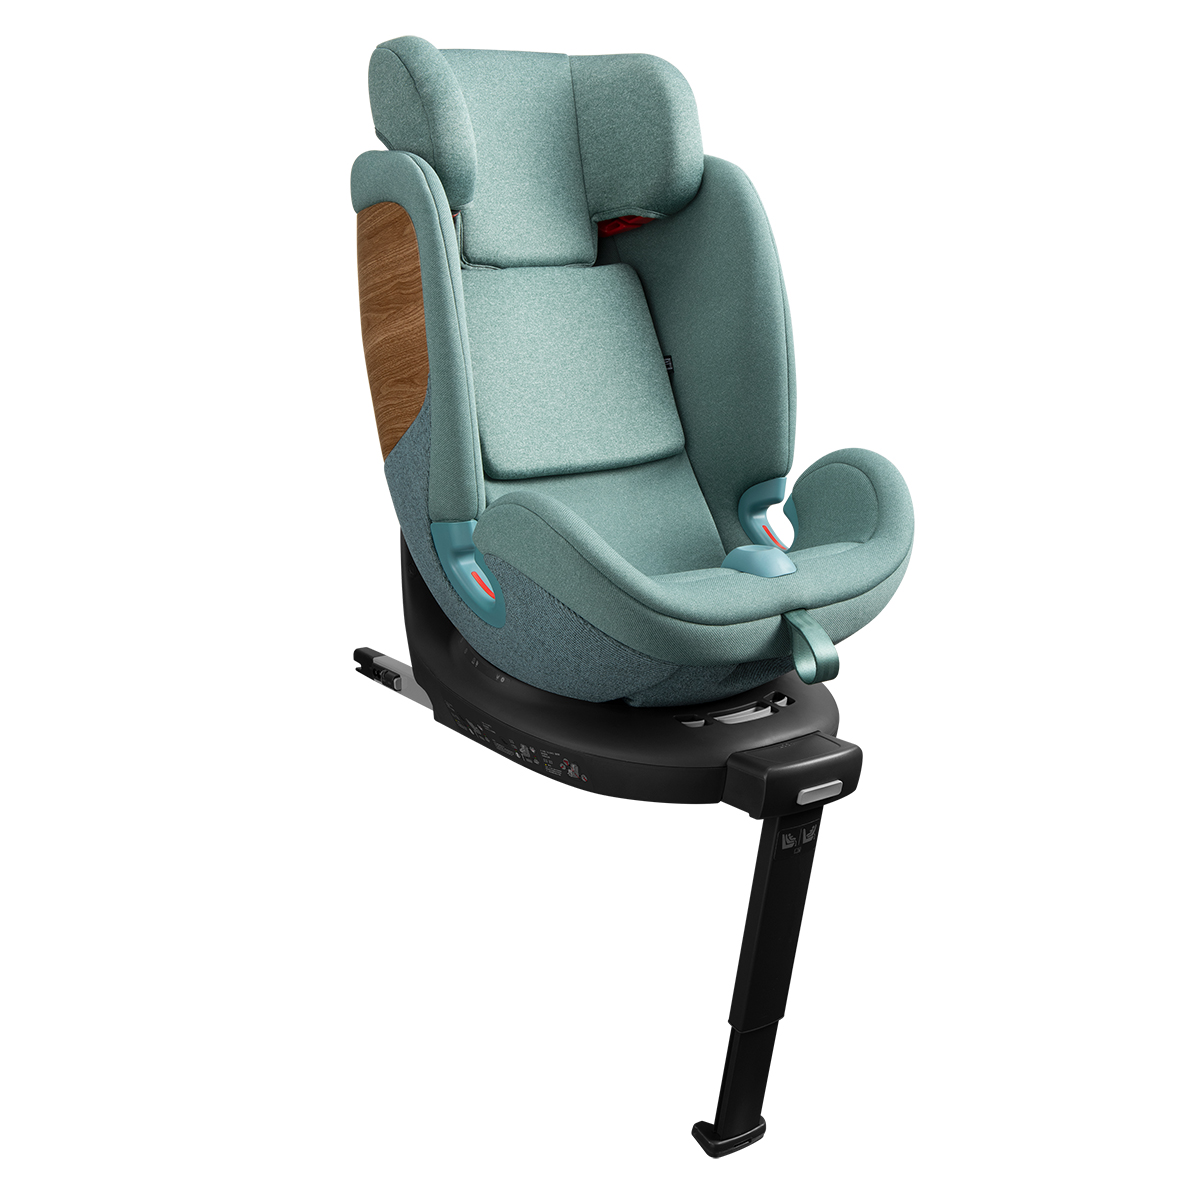 YKO - Maple&Co Child Car Seat - Green